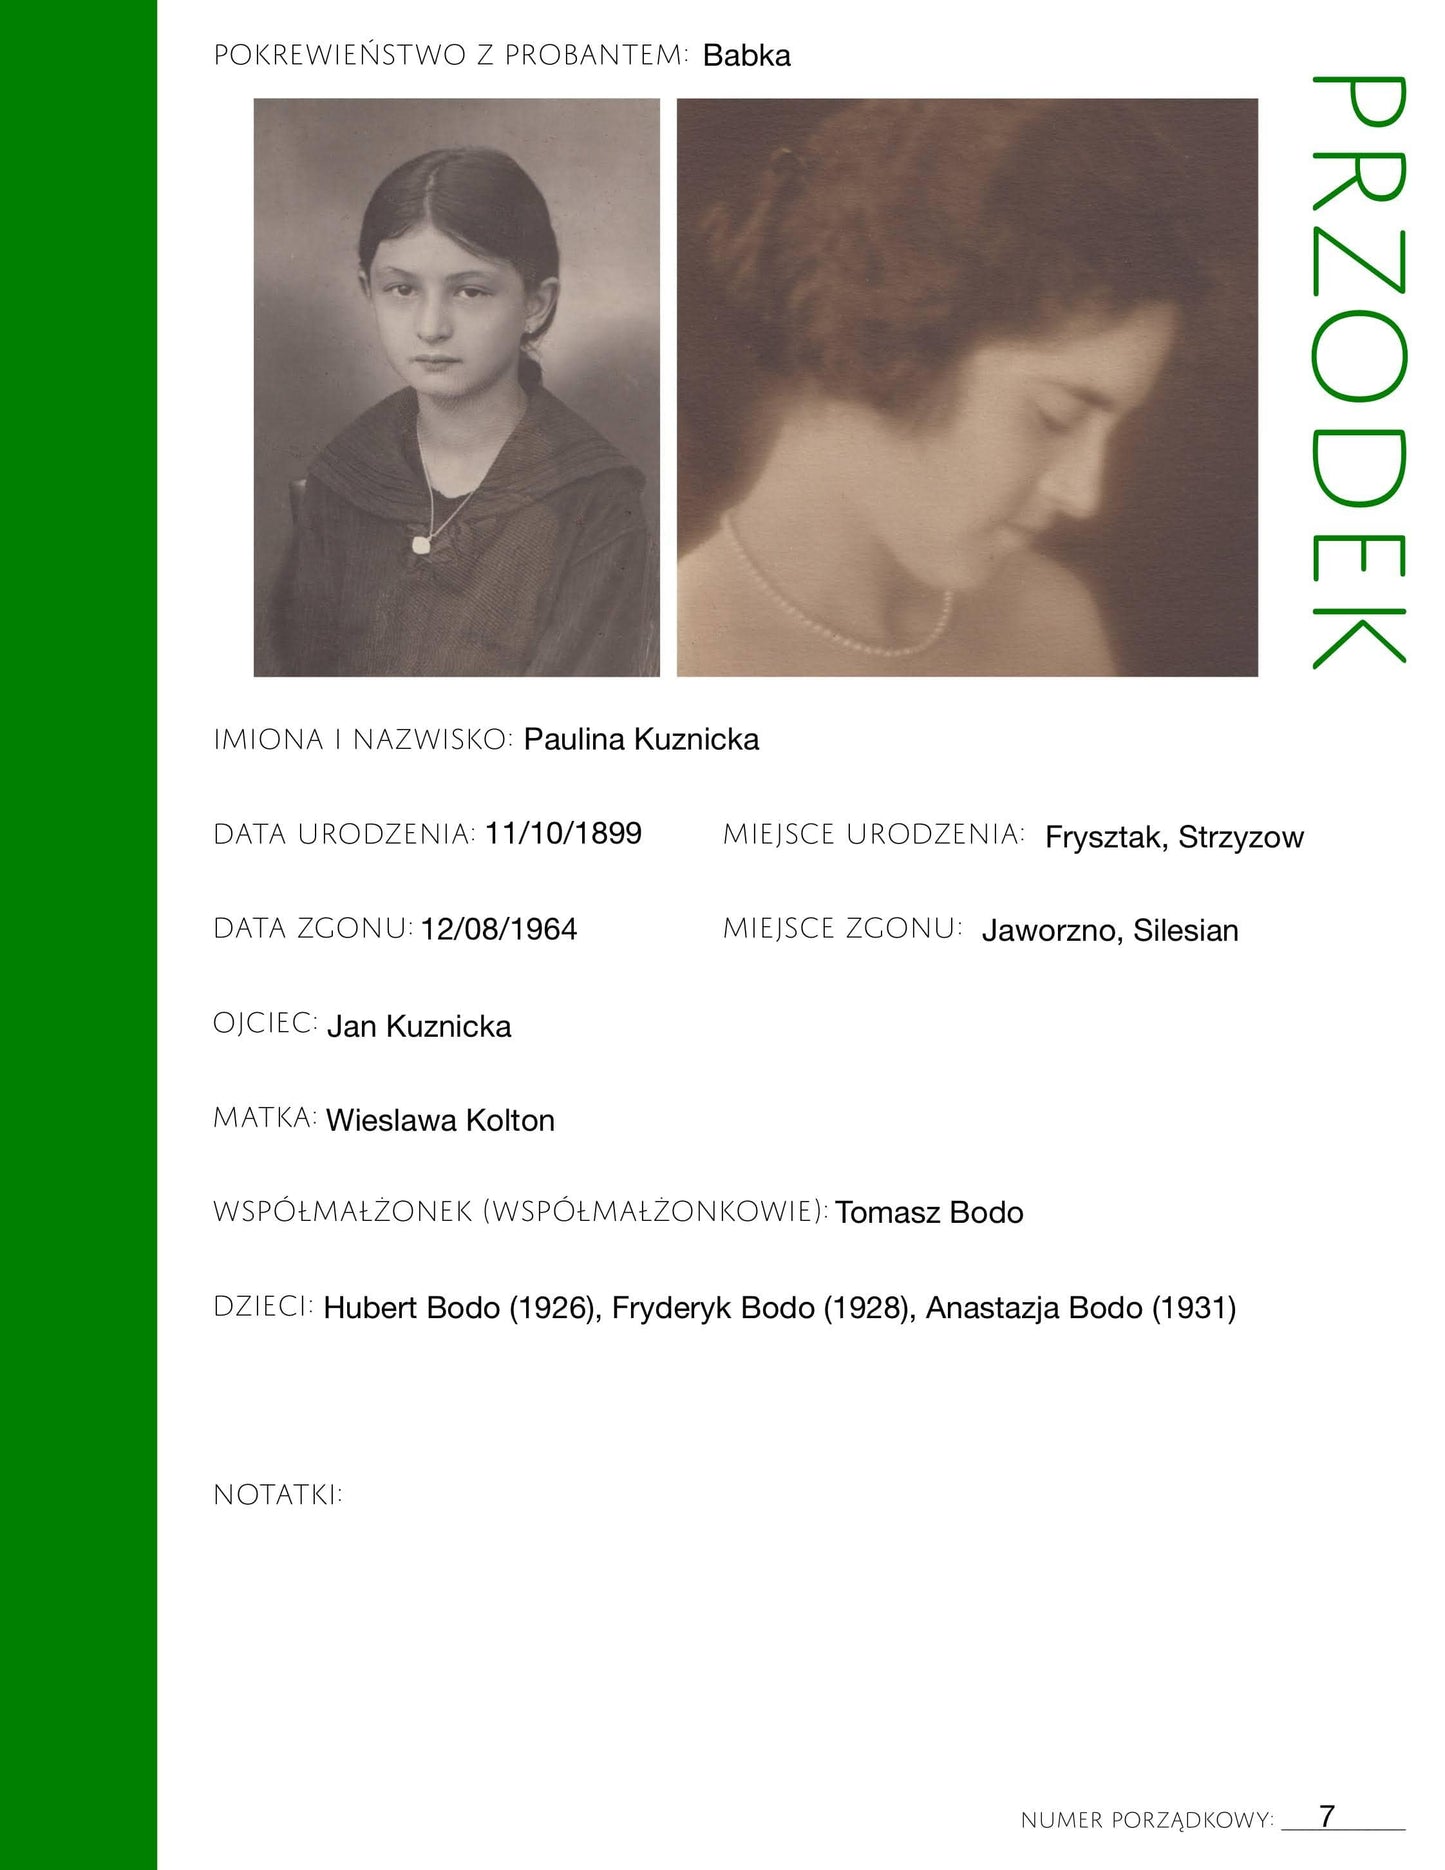 Deluxe Genealogy Pages in Polish /// 200-Page Family History Bundle - Green (Digital Download)